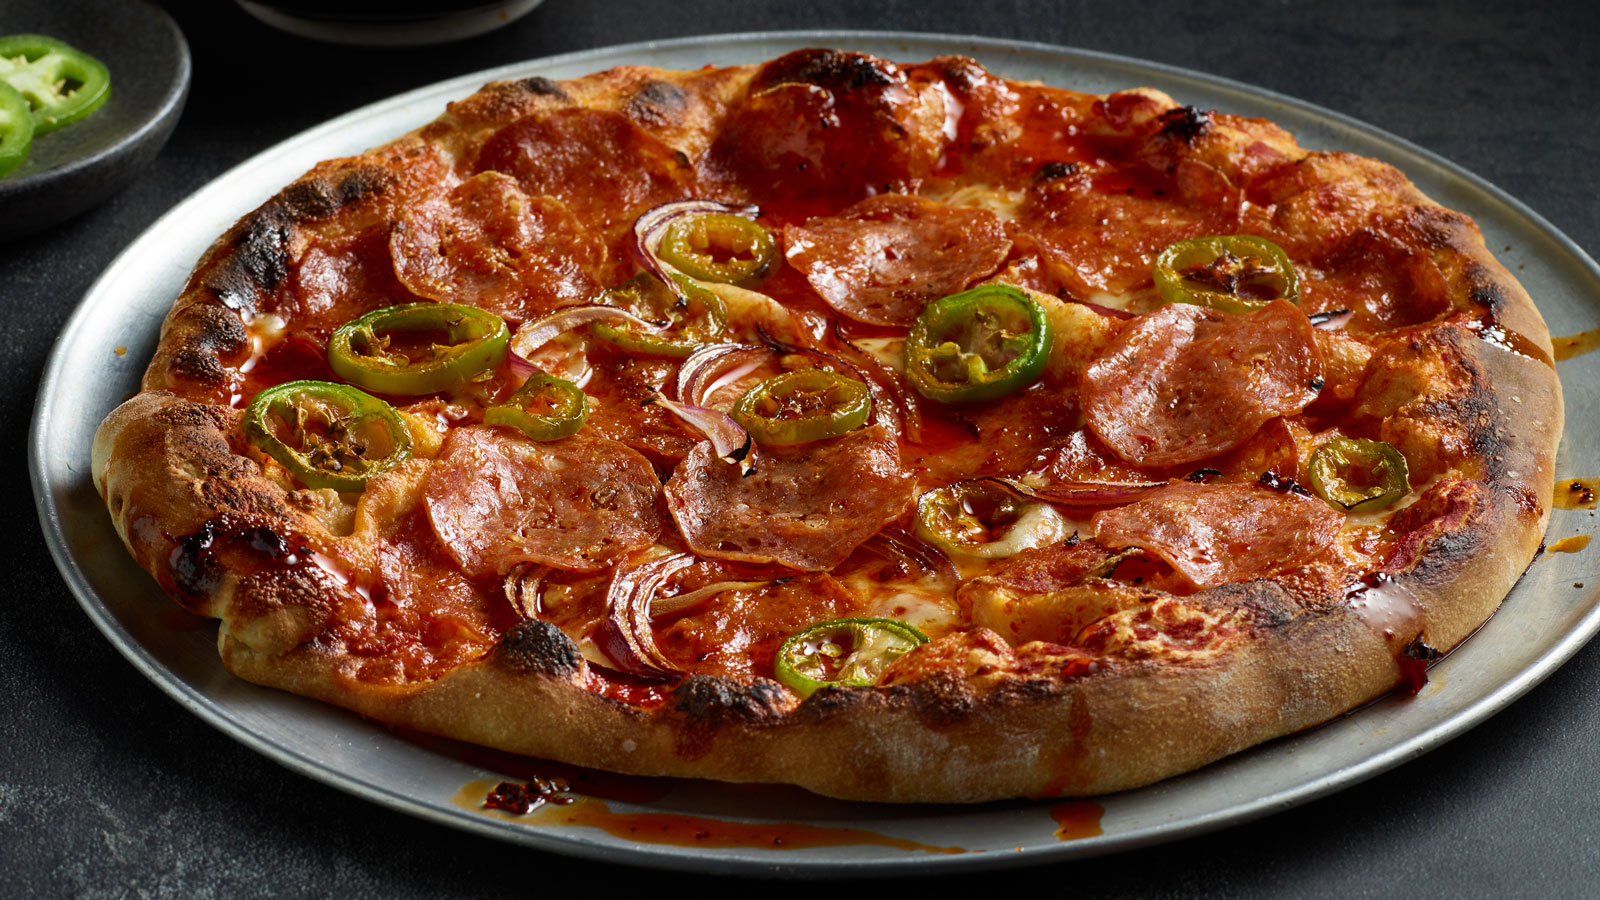 https://www.columbuscraftmeats.com/wp-content/uploads/2023/05/Web_1600_Hot-Sopressata-Red-Onion-and-Jalapeno-Pizza-with-Hot-Chili-Oil-and-Honey.jpg